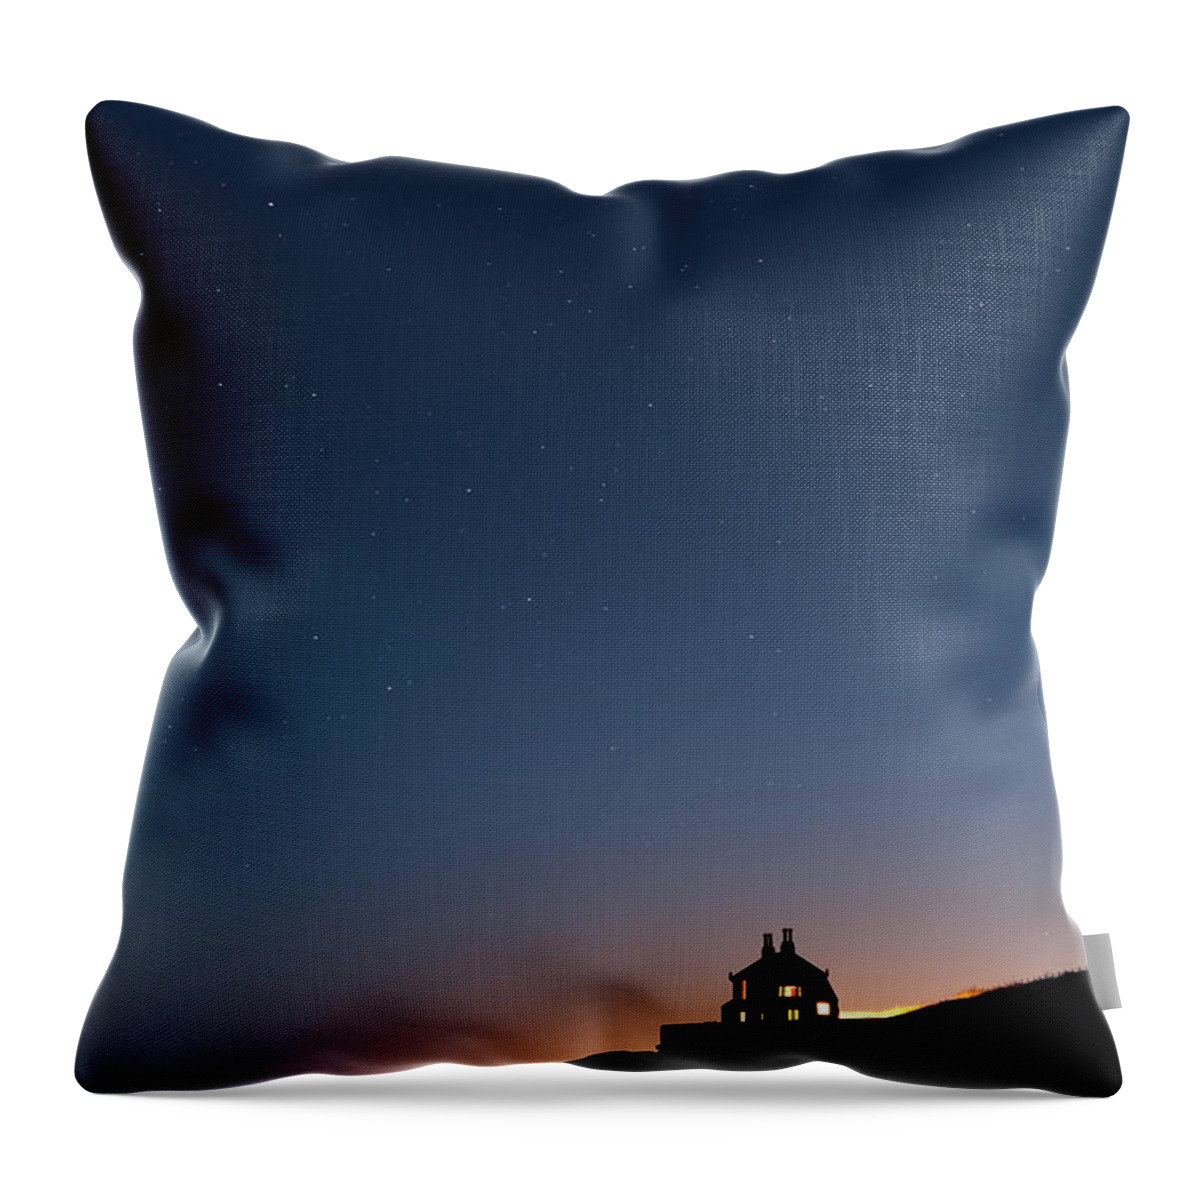 House Throw Pillow featuring the photograph The Bathing House by Anita Nicholson